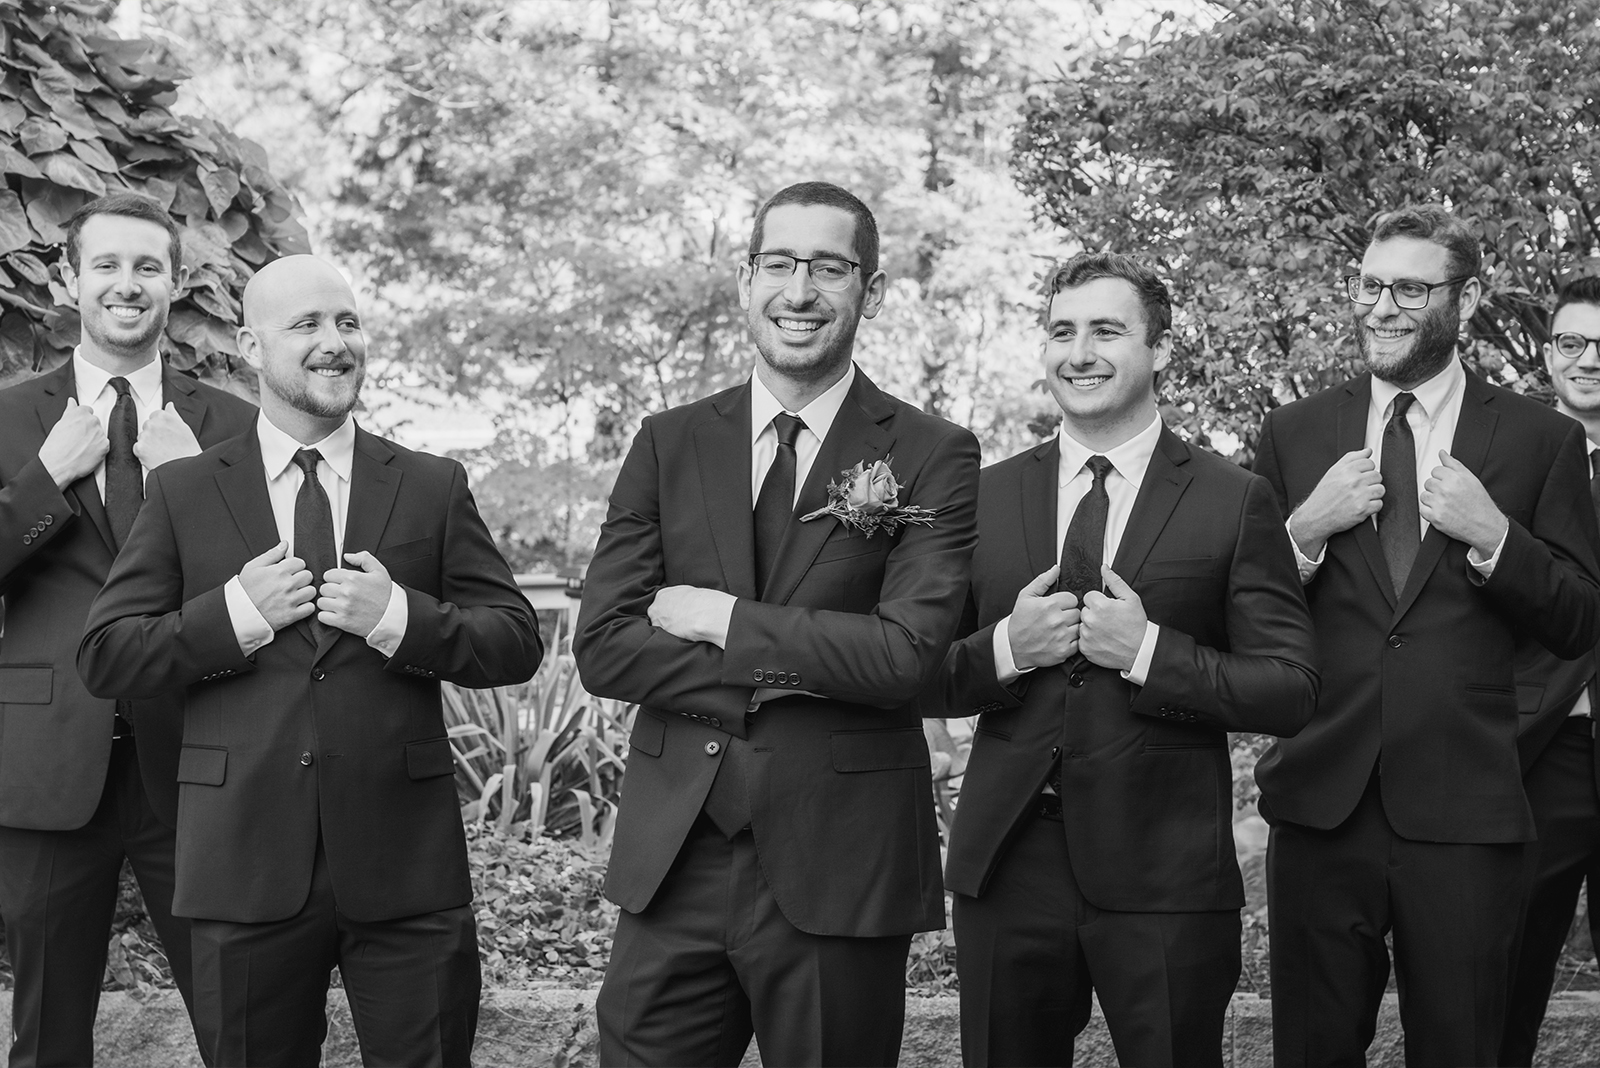 Groom and groomsmen, bridal party portrait, classic, black and white, wedding portrait, nature, trees, classy wedding ceremony at Landerhaven, Mayfield Heights OH